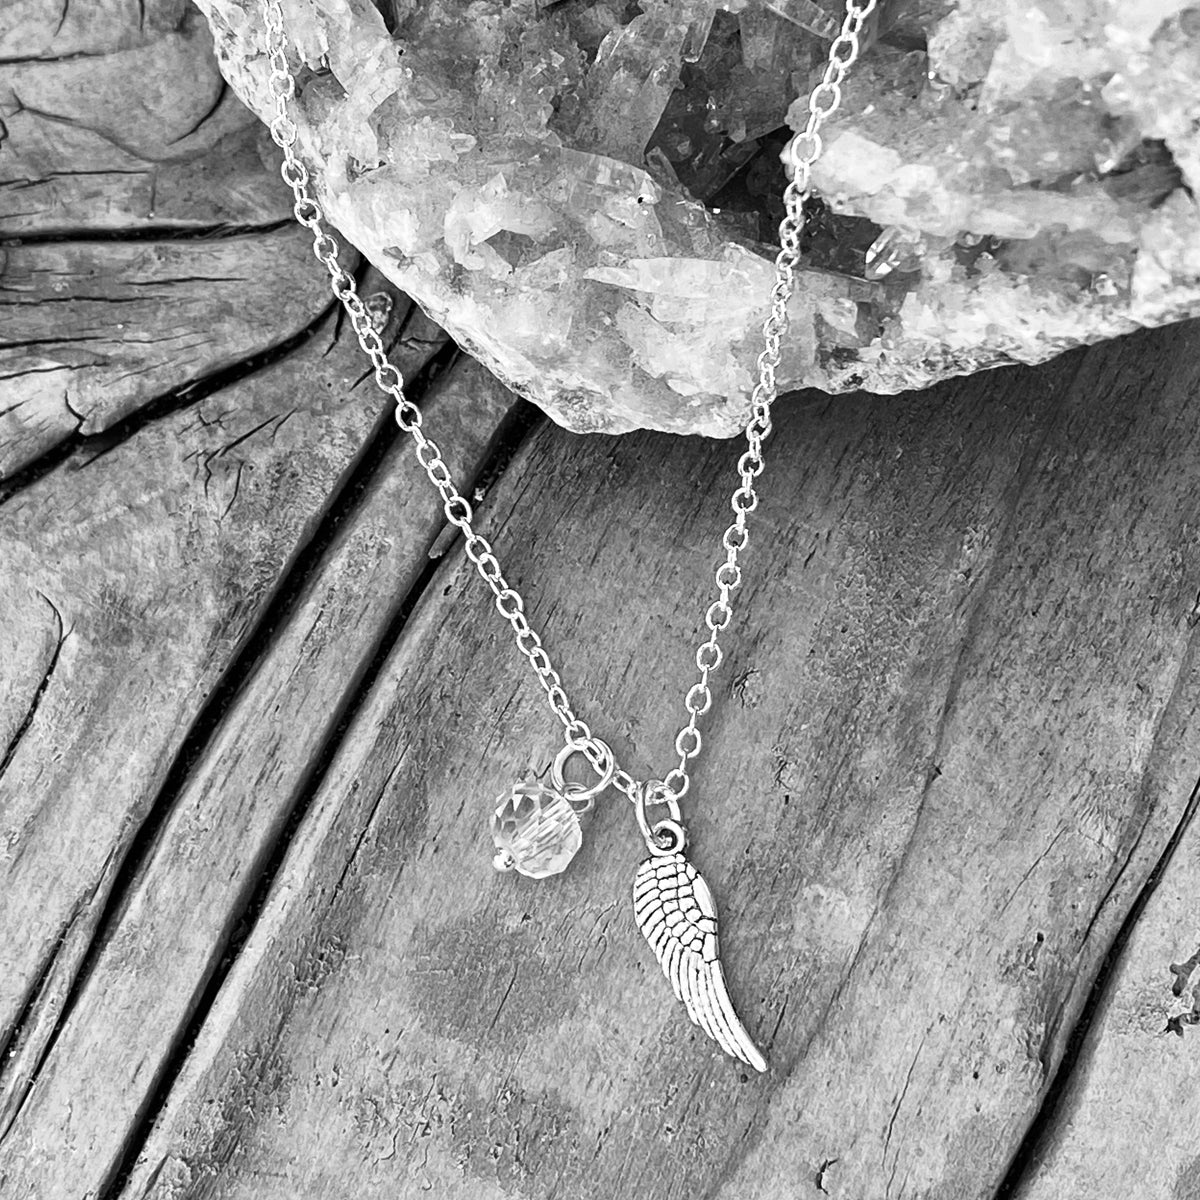 Sterling Silver Guardian Angel Necklace – Select Silver